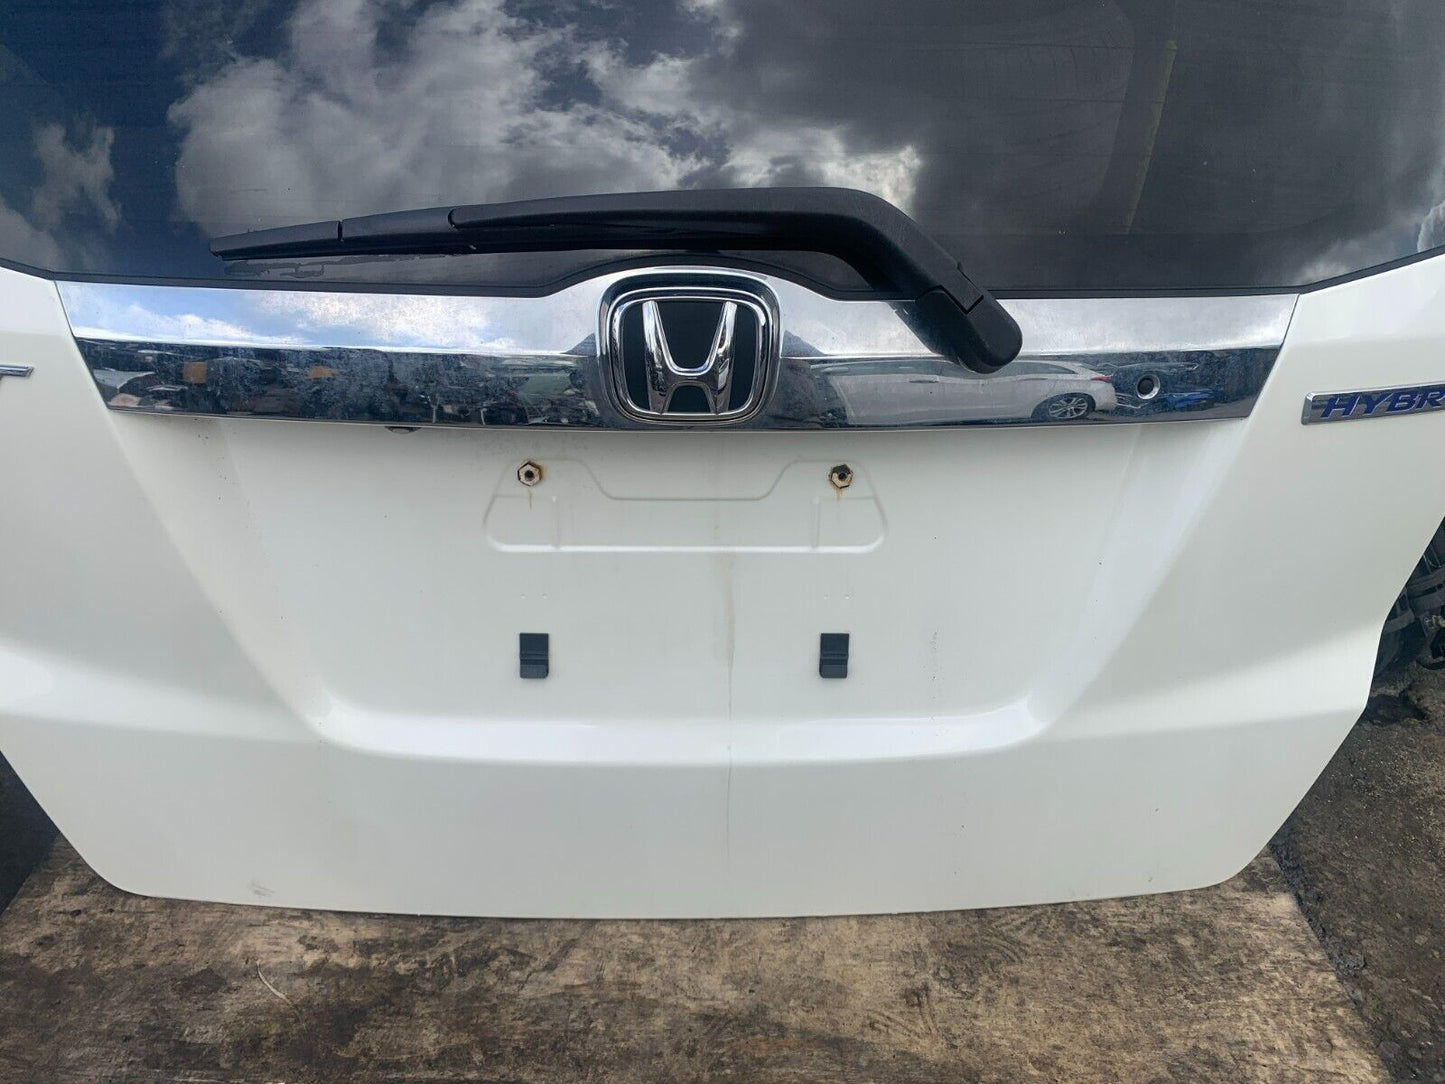 HONDA JAZZ/FIT IMPORT 2009-2015 GENUINE COMPLETE TAILGATE NH624P WHITE PEARL